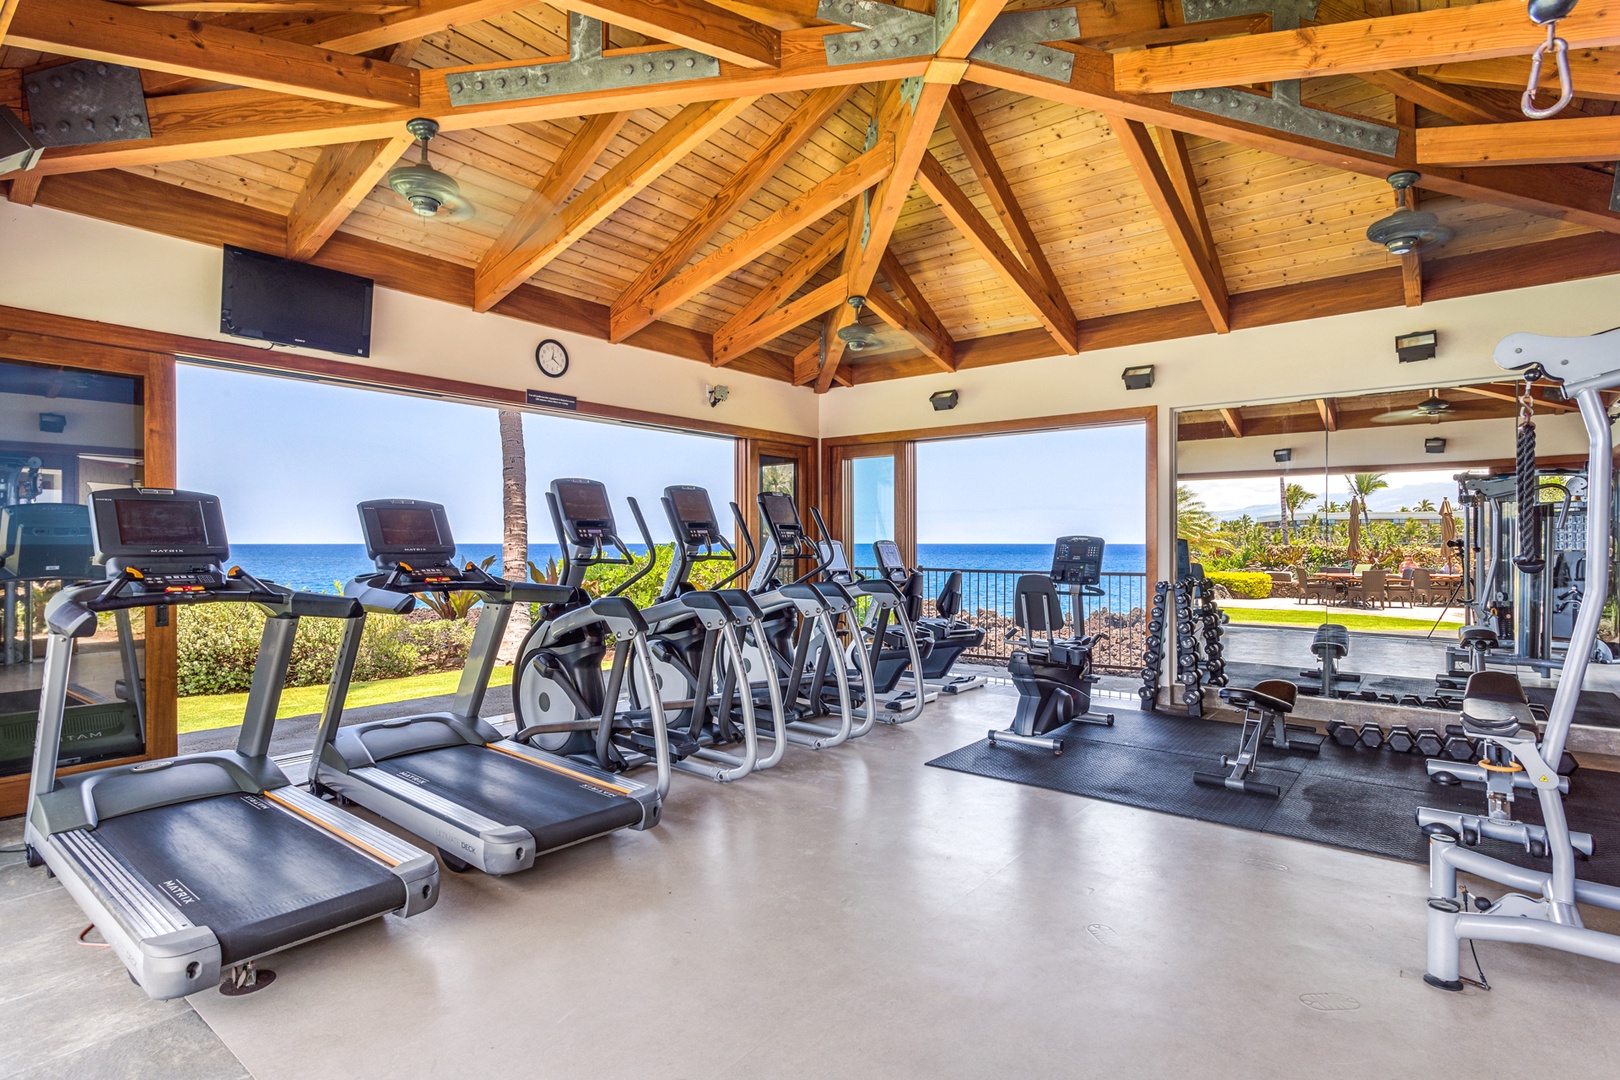 Waikoloa Vacation Rentals, 2BD Hali'i Kai (12C) at Waikoloa Resort - Fitness room interior with multiple and varied cardio and weight machines.